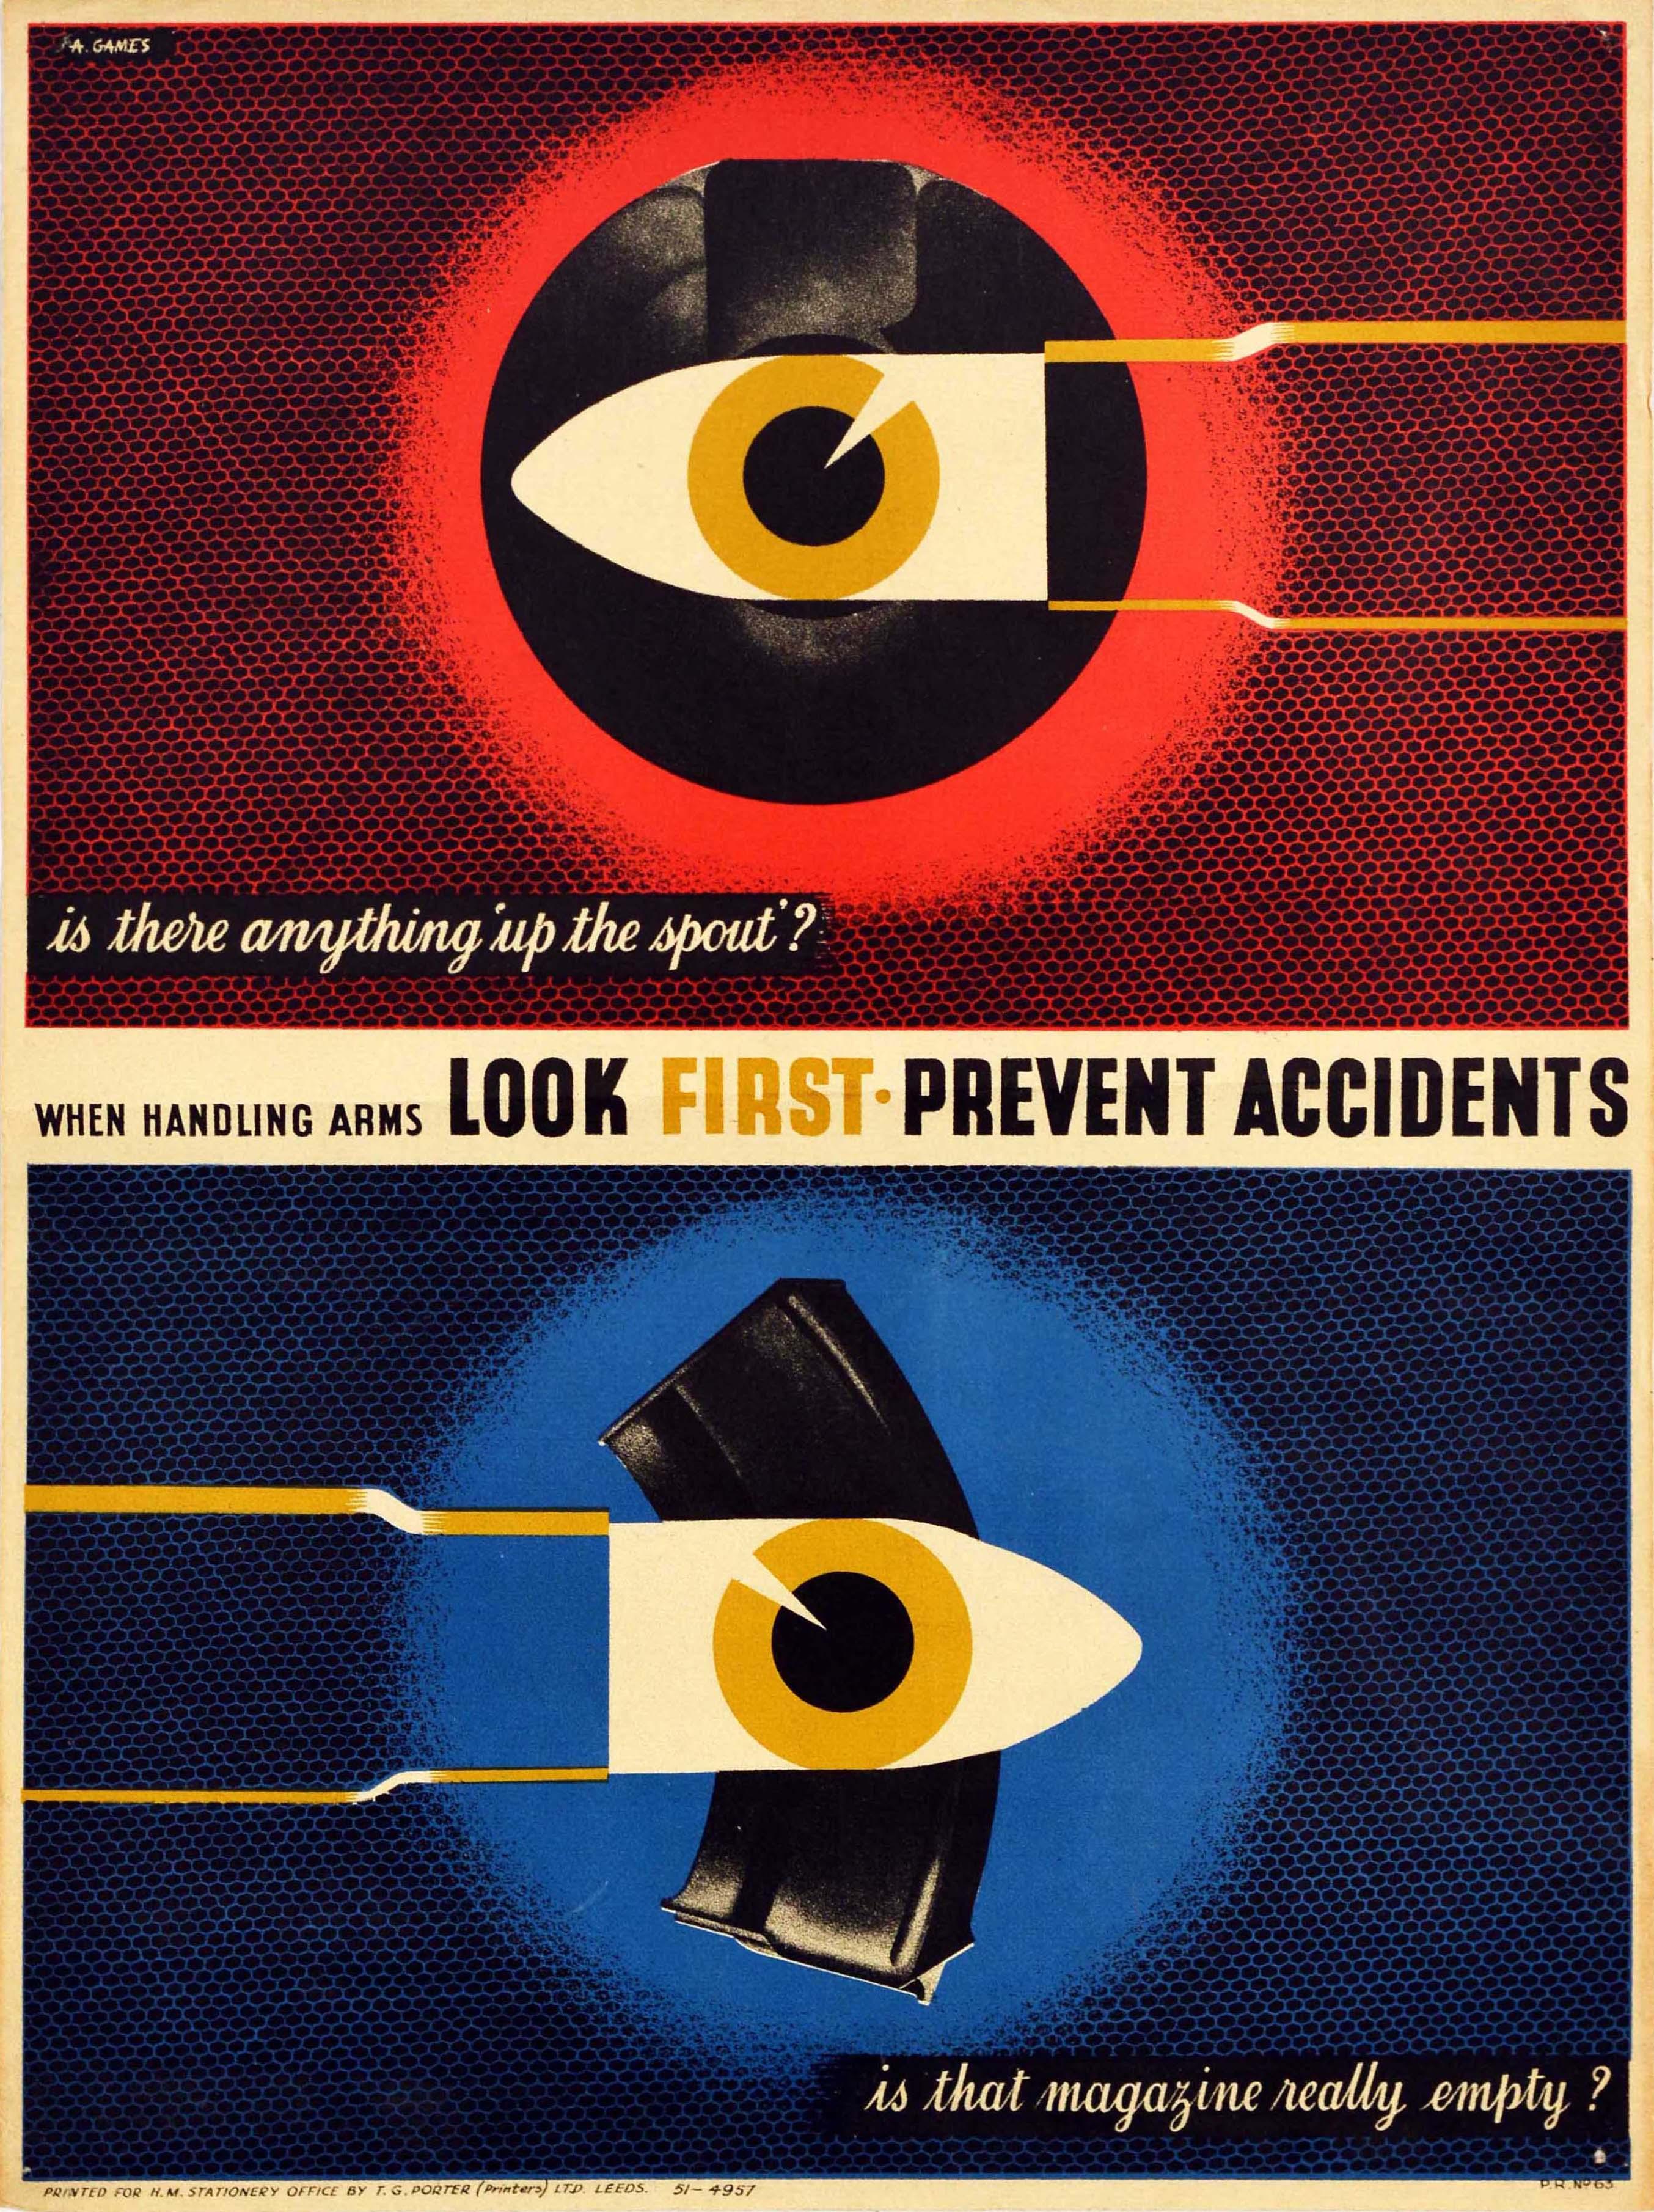 Abram Games Print - Original Vintage WWII Poster Look First Prevent Accidents Bullets Graphic Design